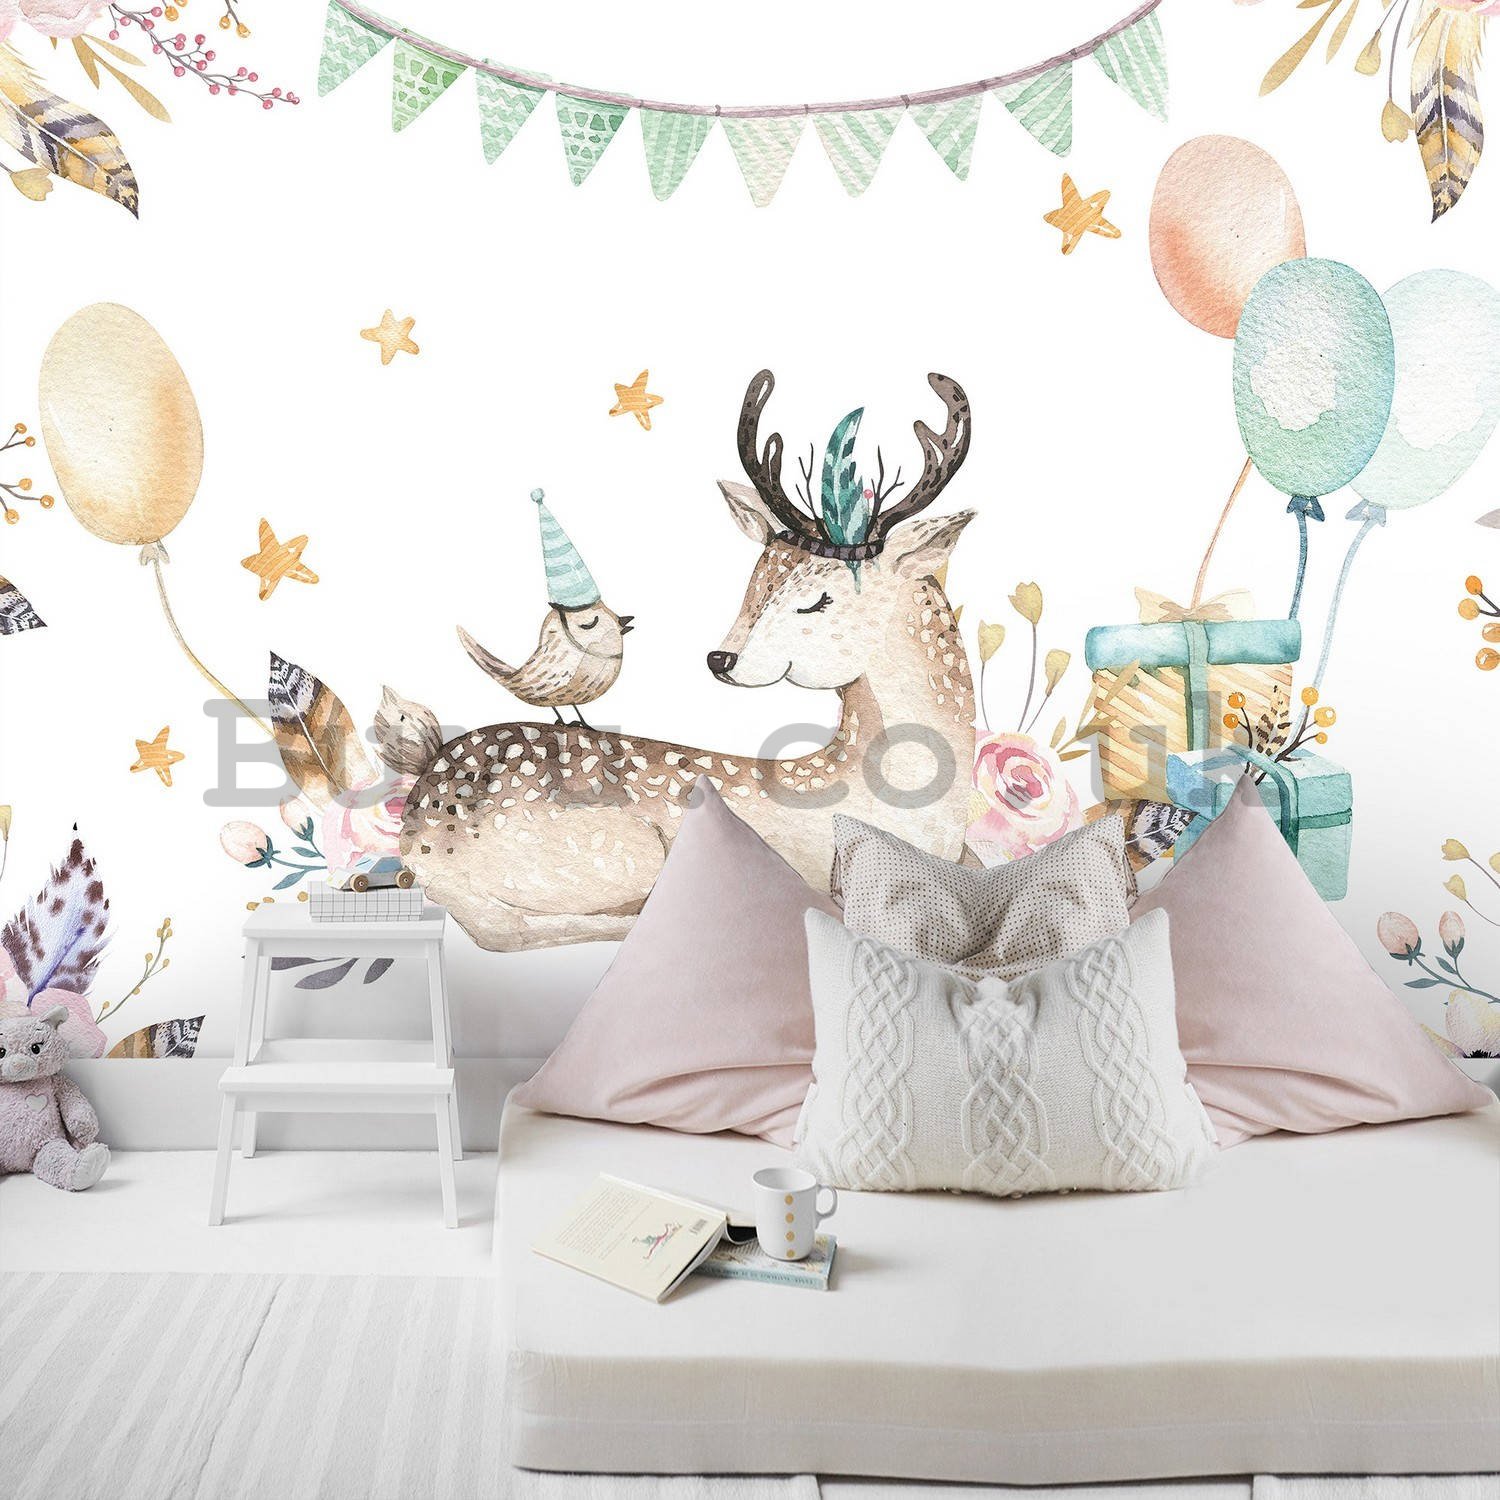 Wall mural vlies: Celebration with animals - 368x254 cm